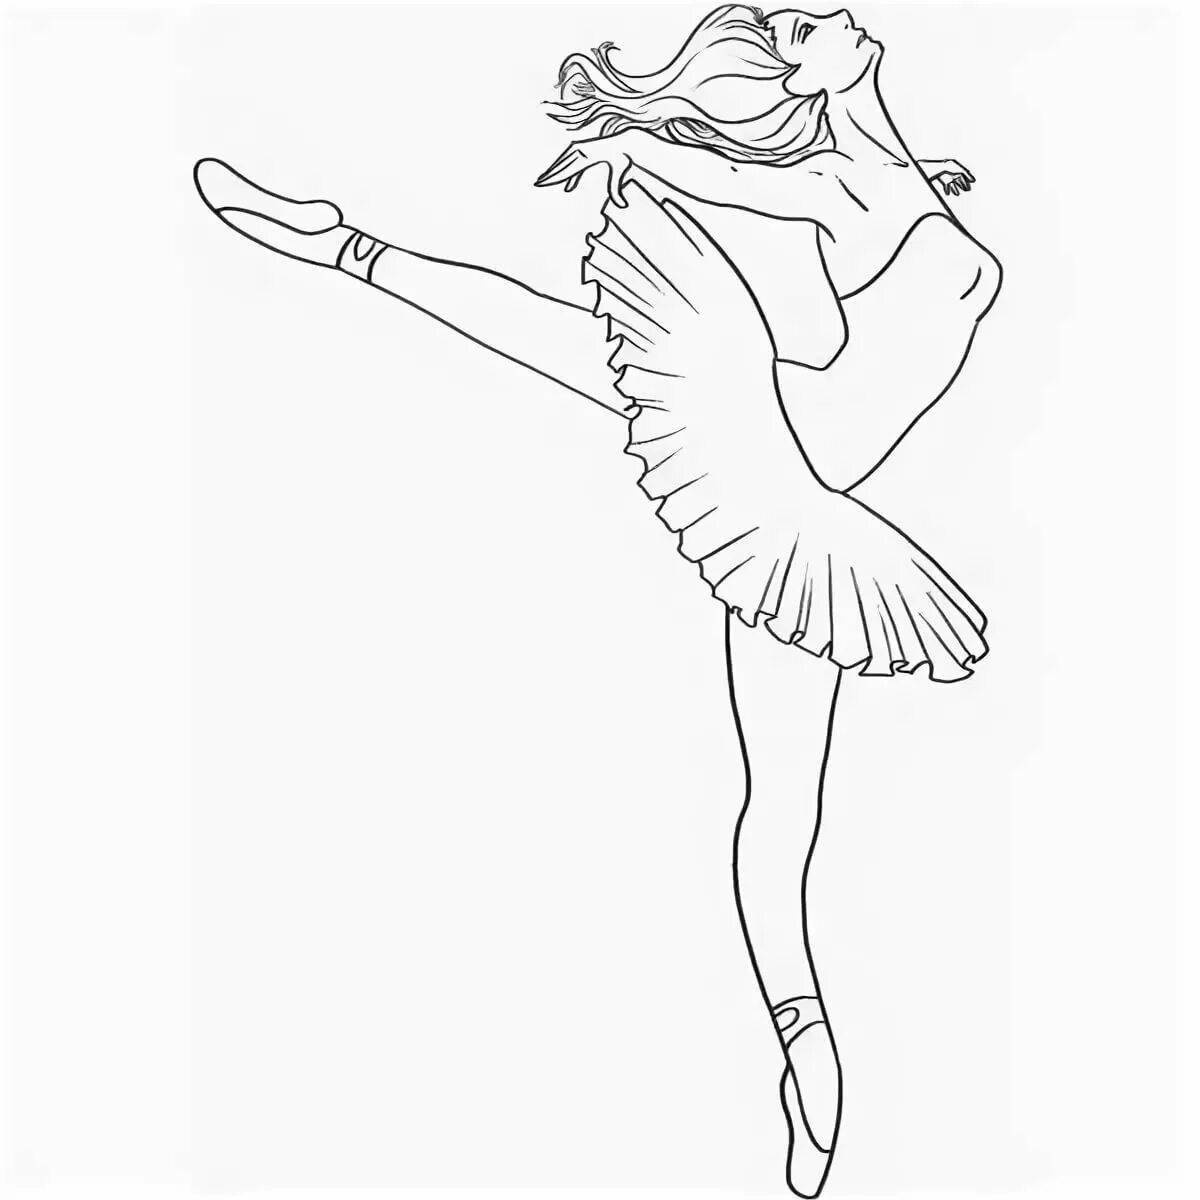 Charming drawing of a ballerina